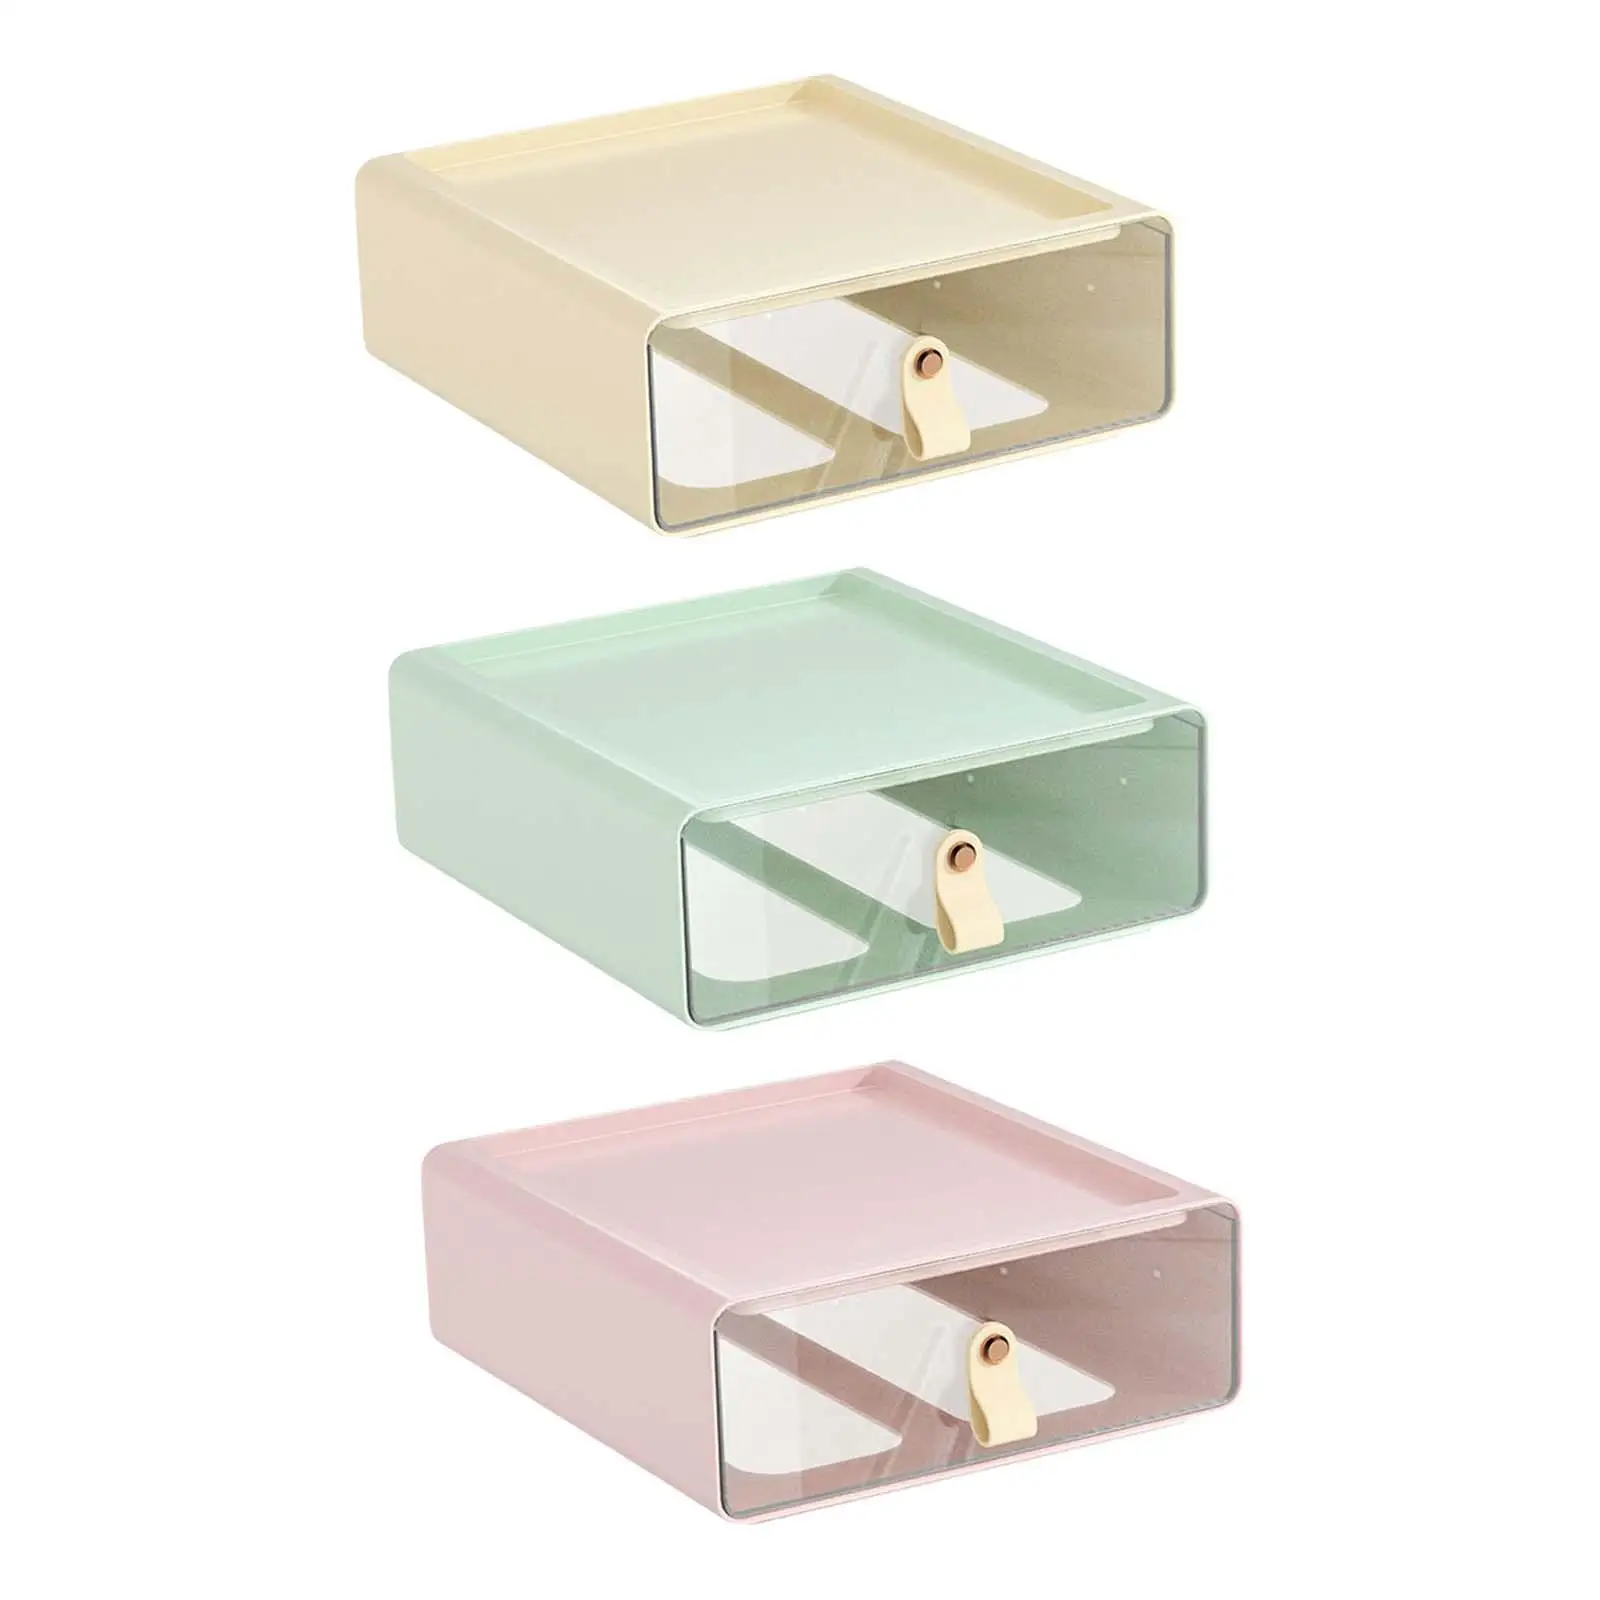 Desk Organizer Drawer Portable Accessory Sundry Container Desktop Stationery Organizer Makeup Storage Box for Daily Use Office